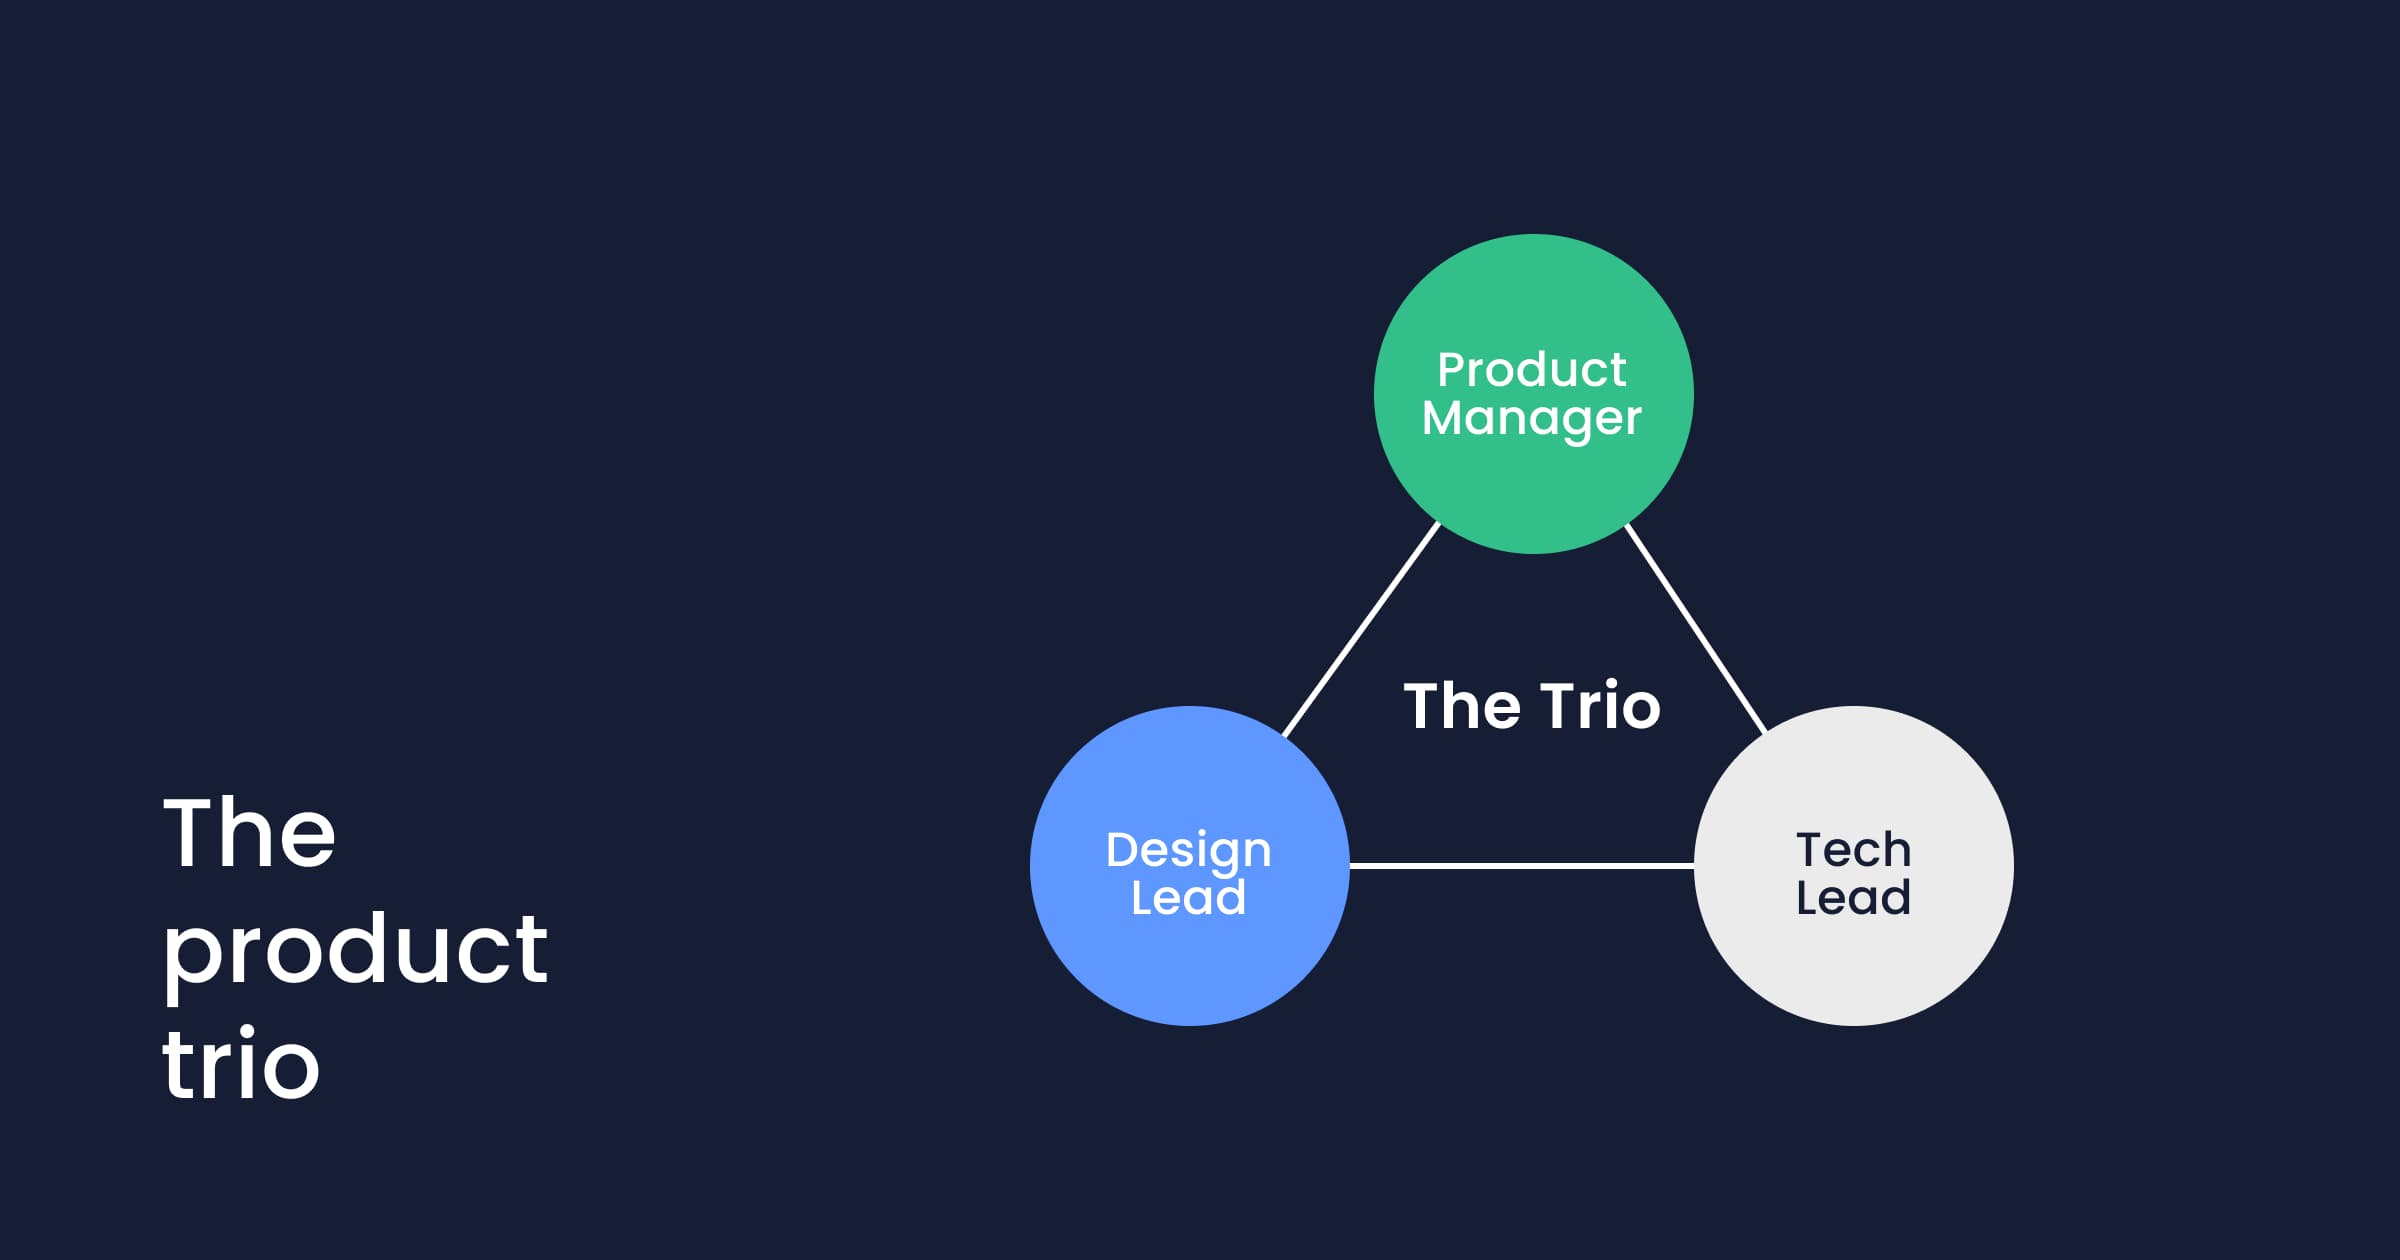 The traditional product team structure